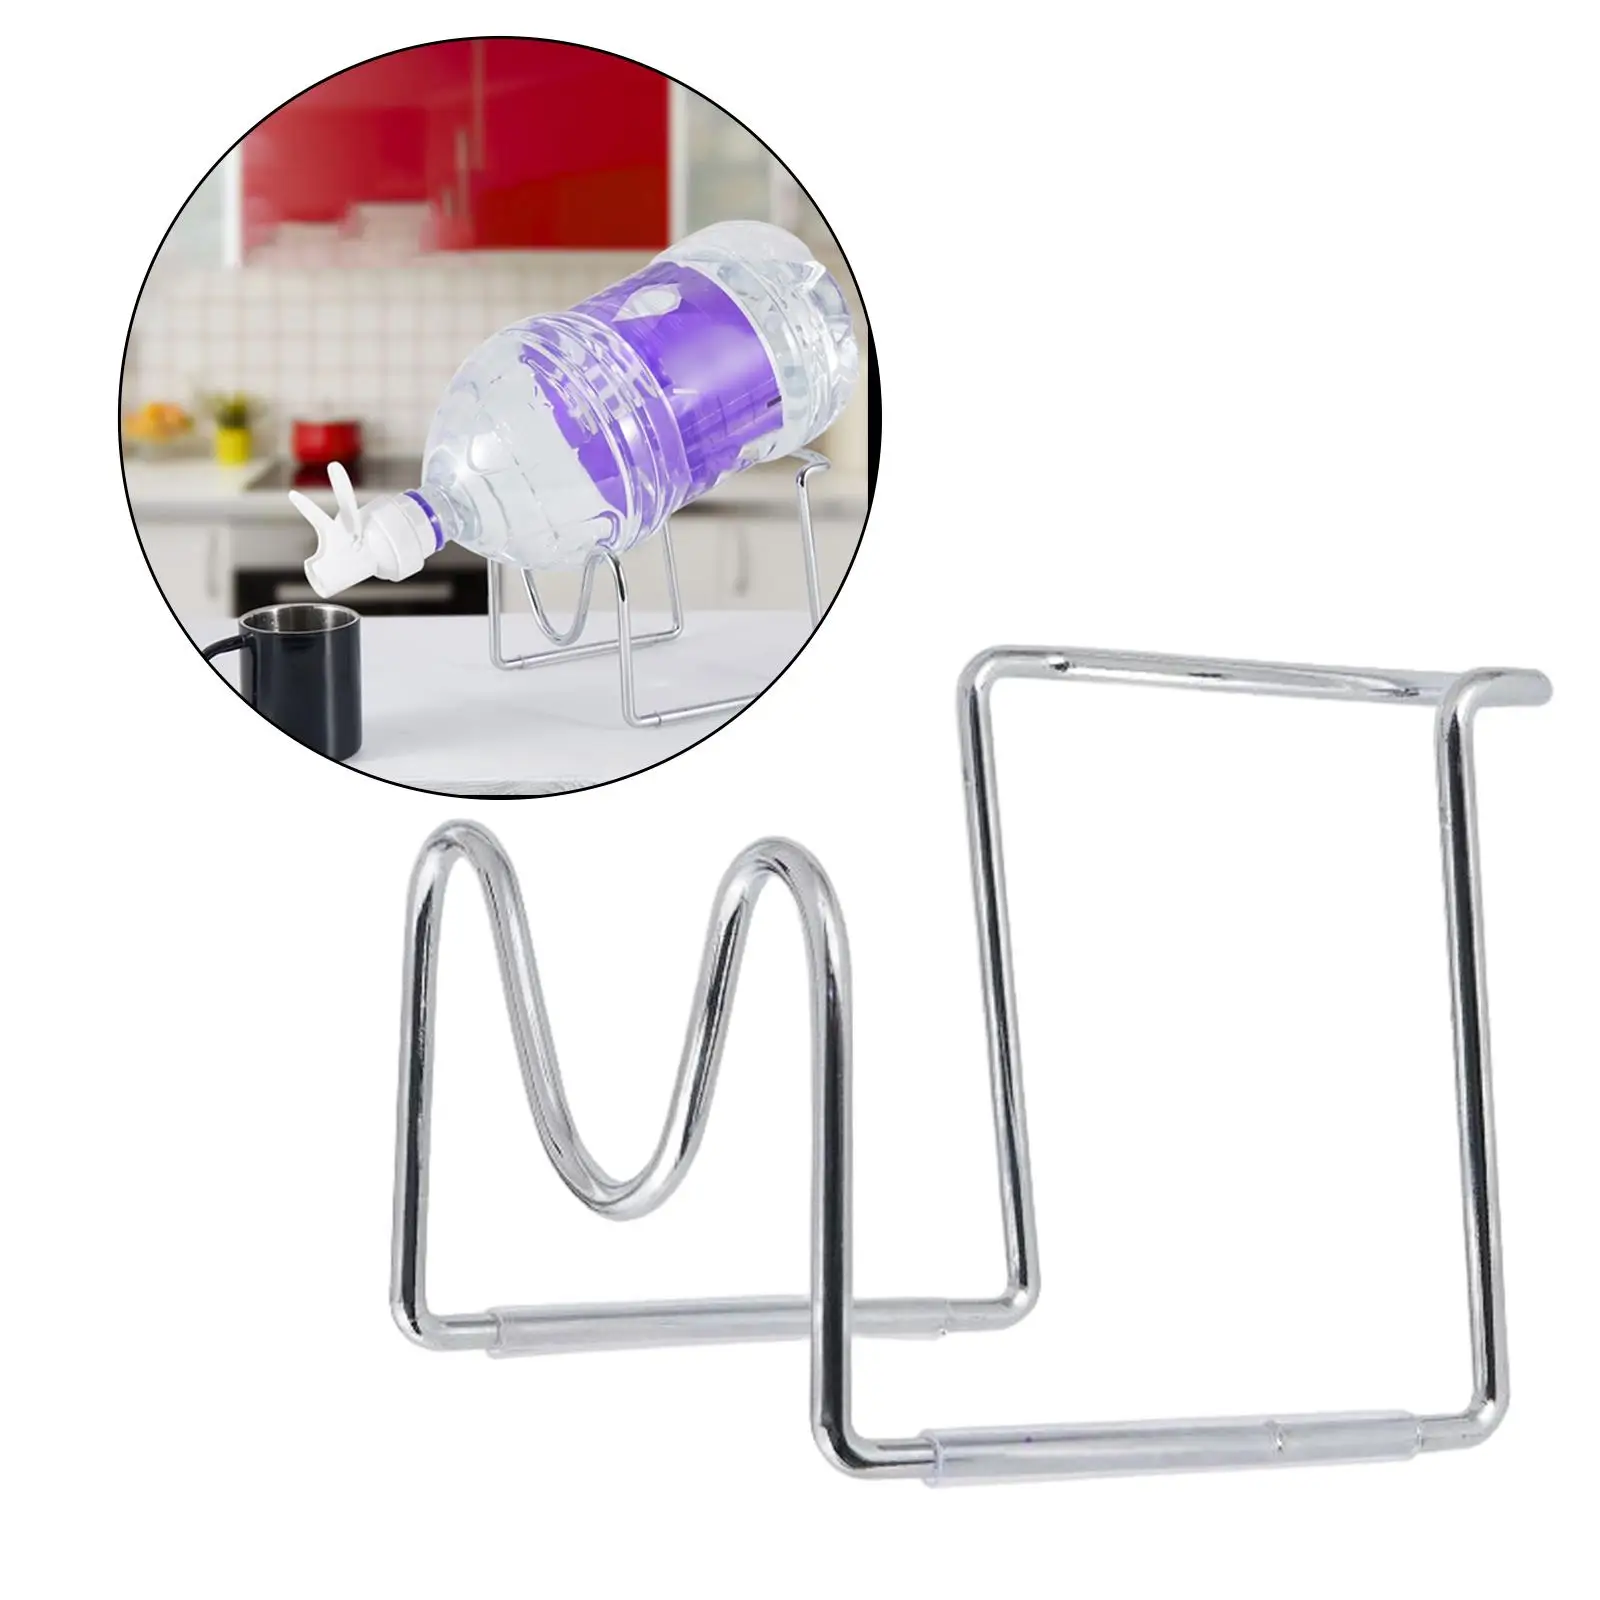 5L Water Jug Stand Drink Dispenser Stand Water Bottle Holder for Party